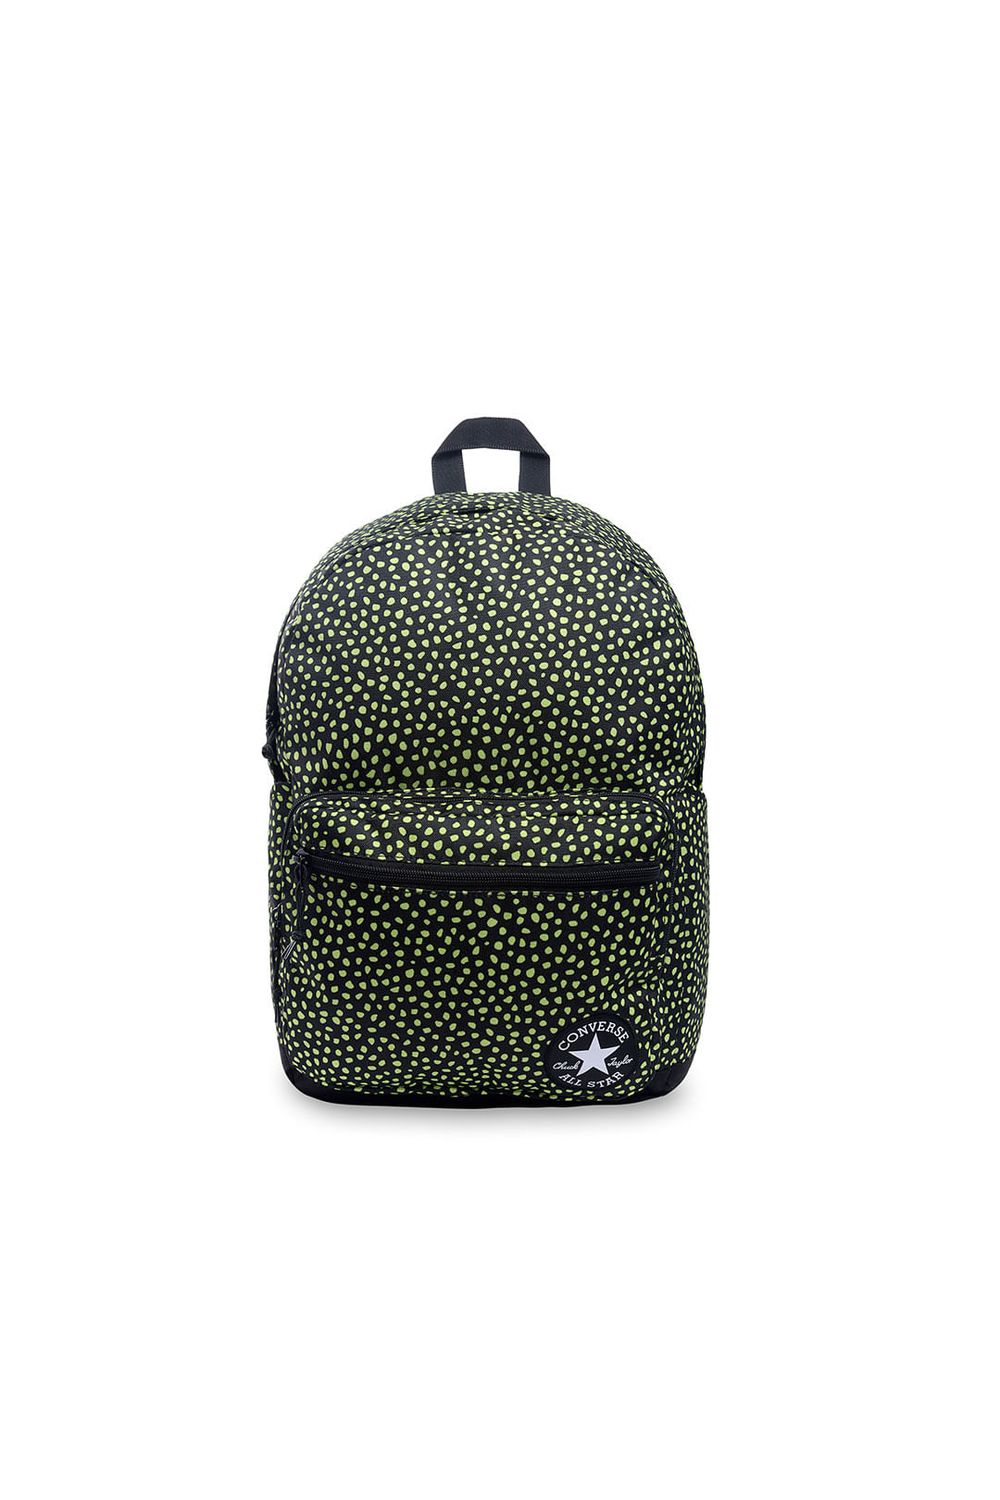 CONVERSE MORRAL UNISEX GO BACKPACK